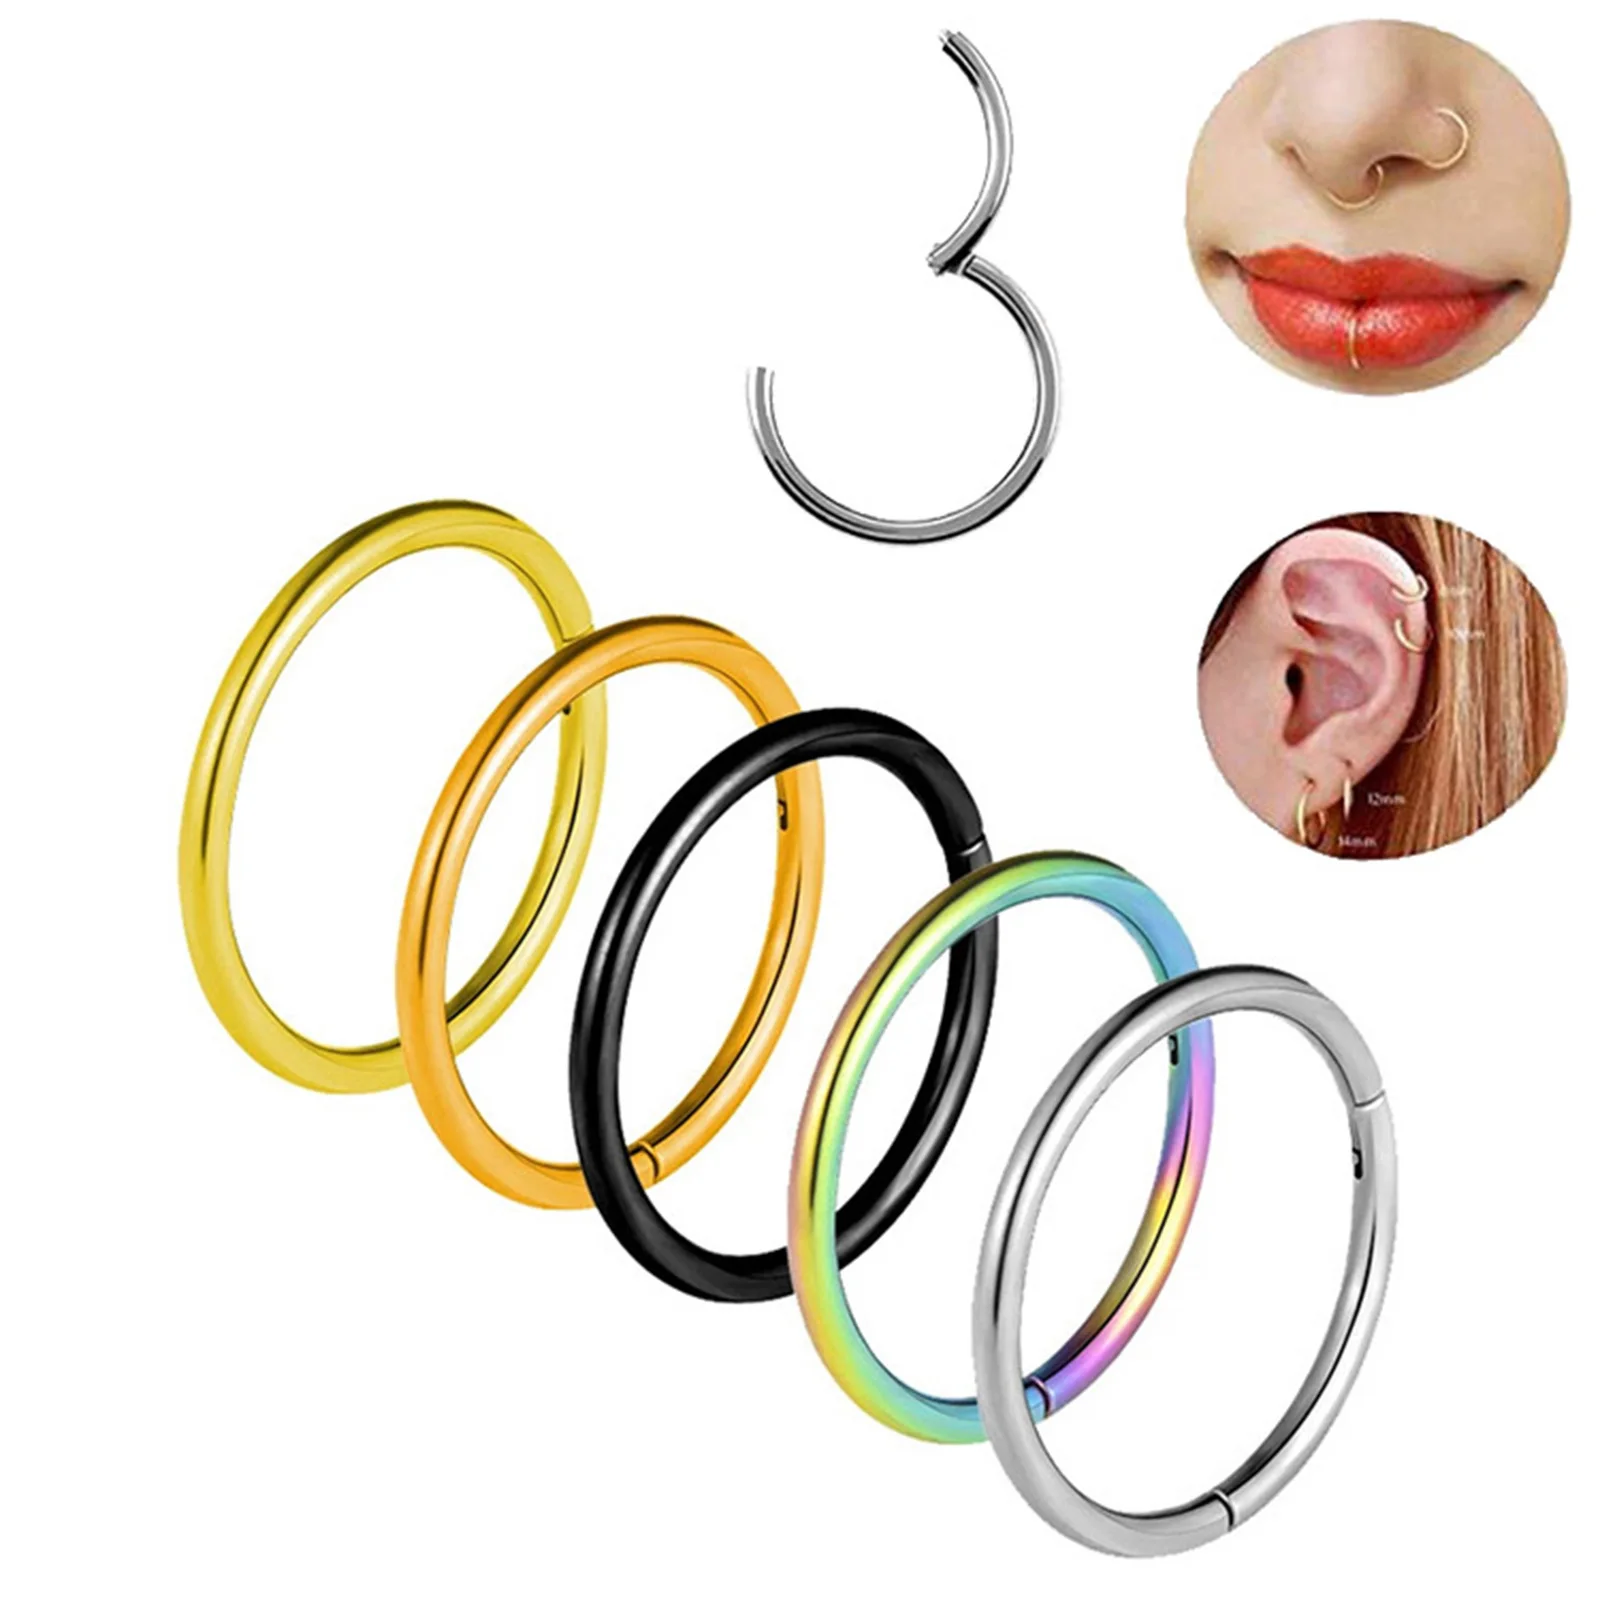 2PCs Stainless Steel Nose Ring Hoops Body Piercing Jewelry Round Nose Ring Hinged Segment Seamless Earrings Women Men Jewelry